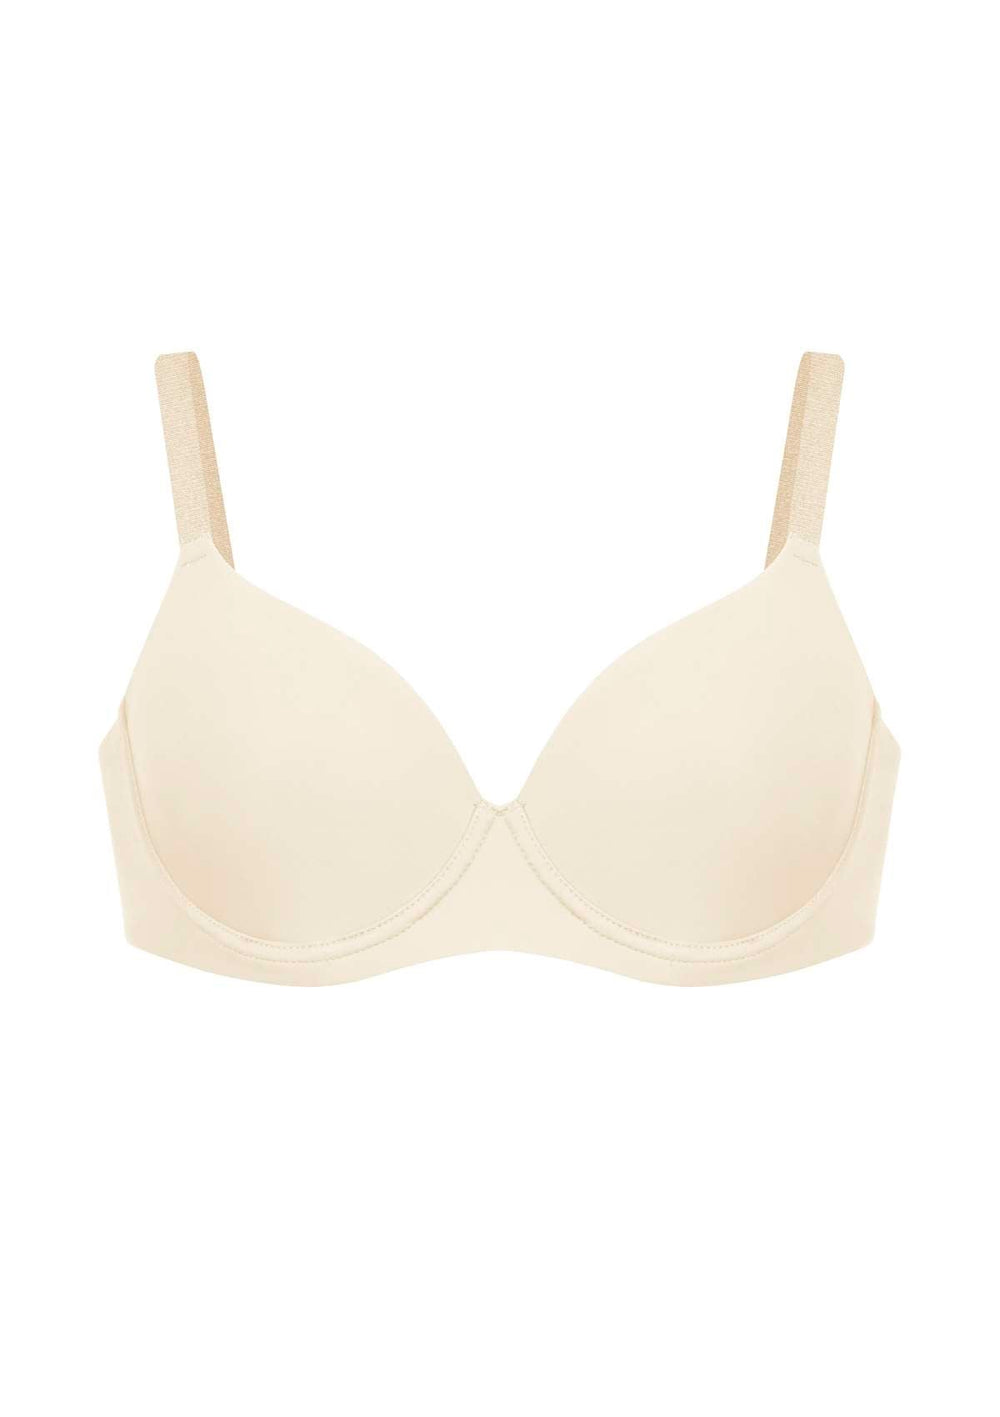 HSIA Gemma T-Shirt Bra and Panty Set - A Classic and Practical Choice